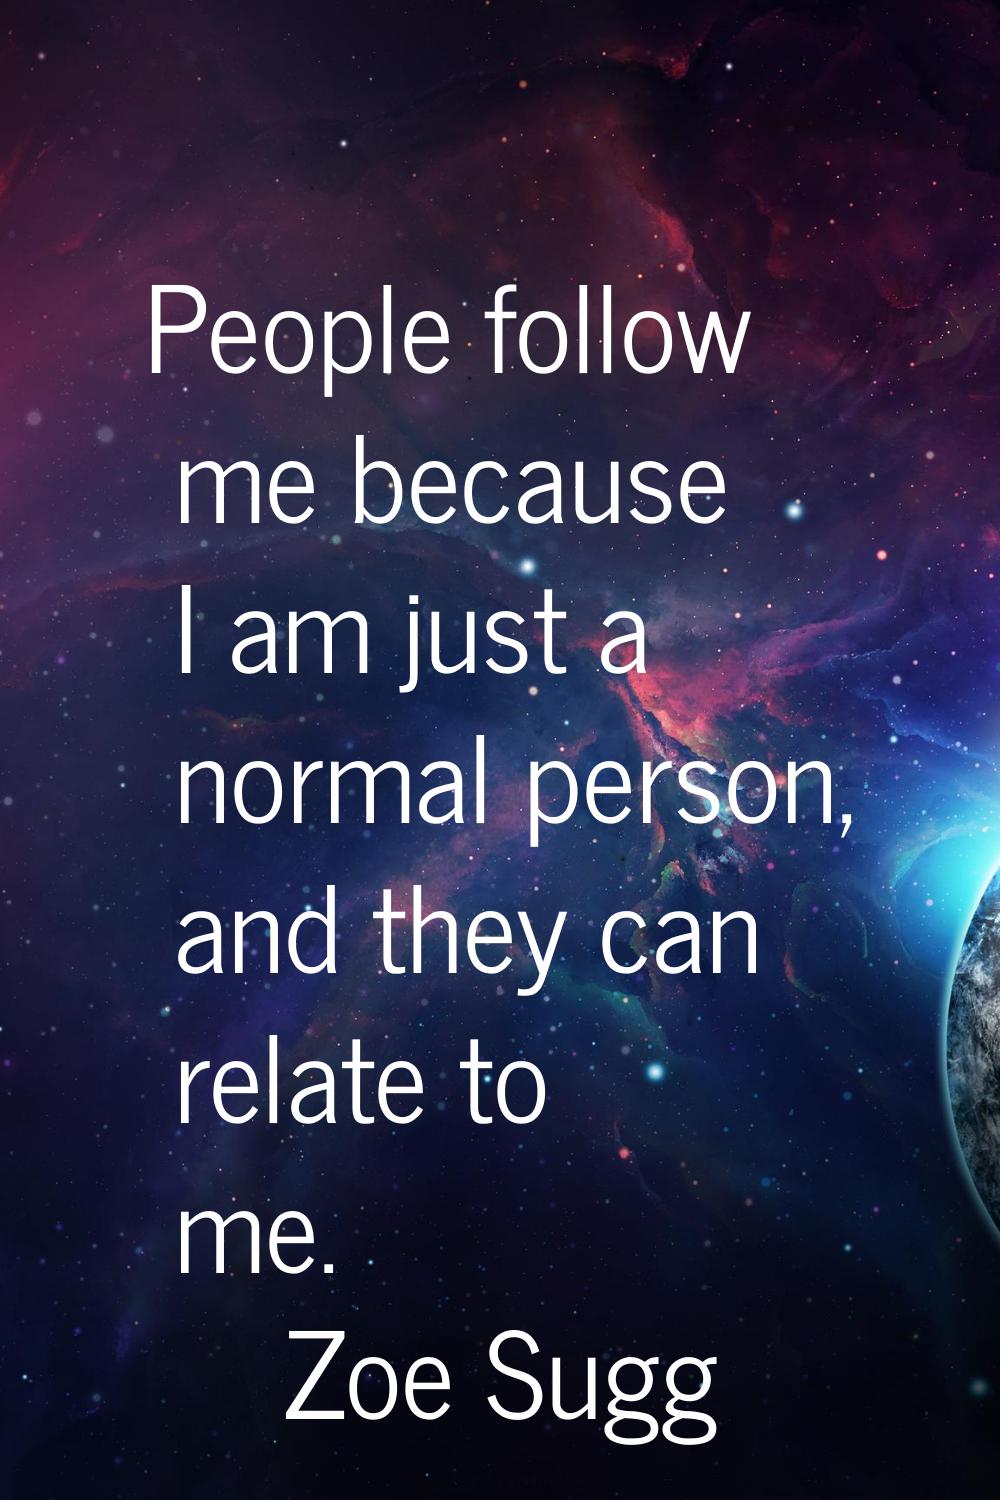 People follow me because I am just a normal person, and they can relate to me.